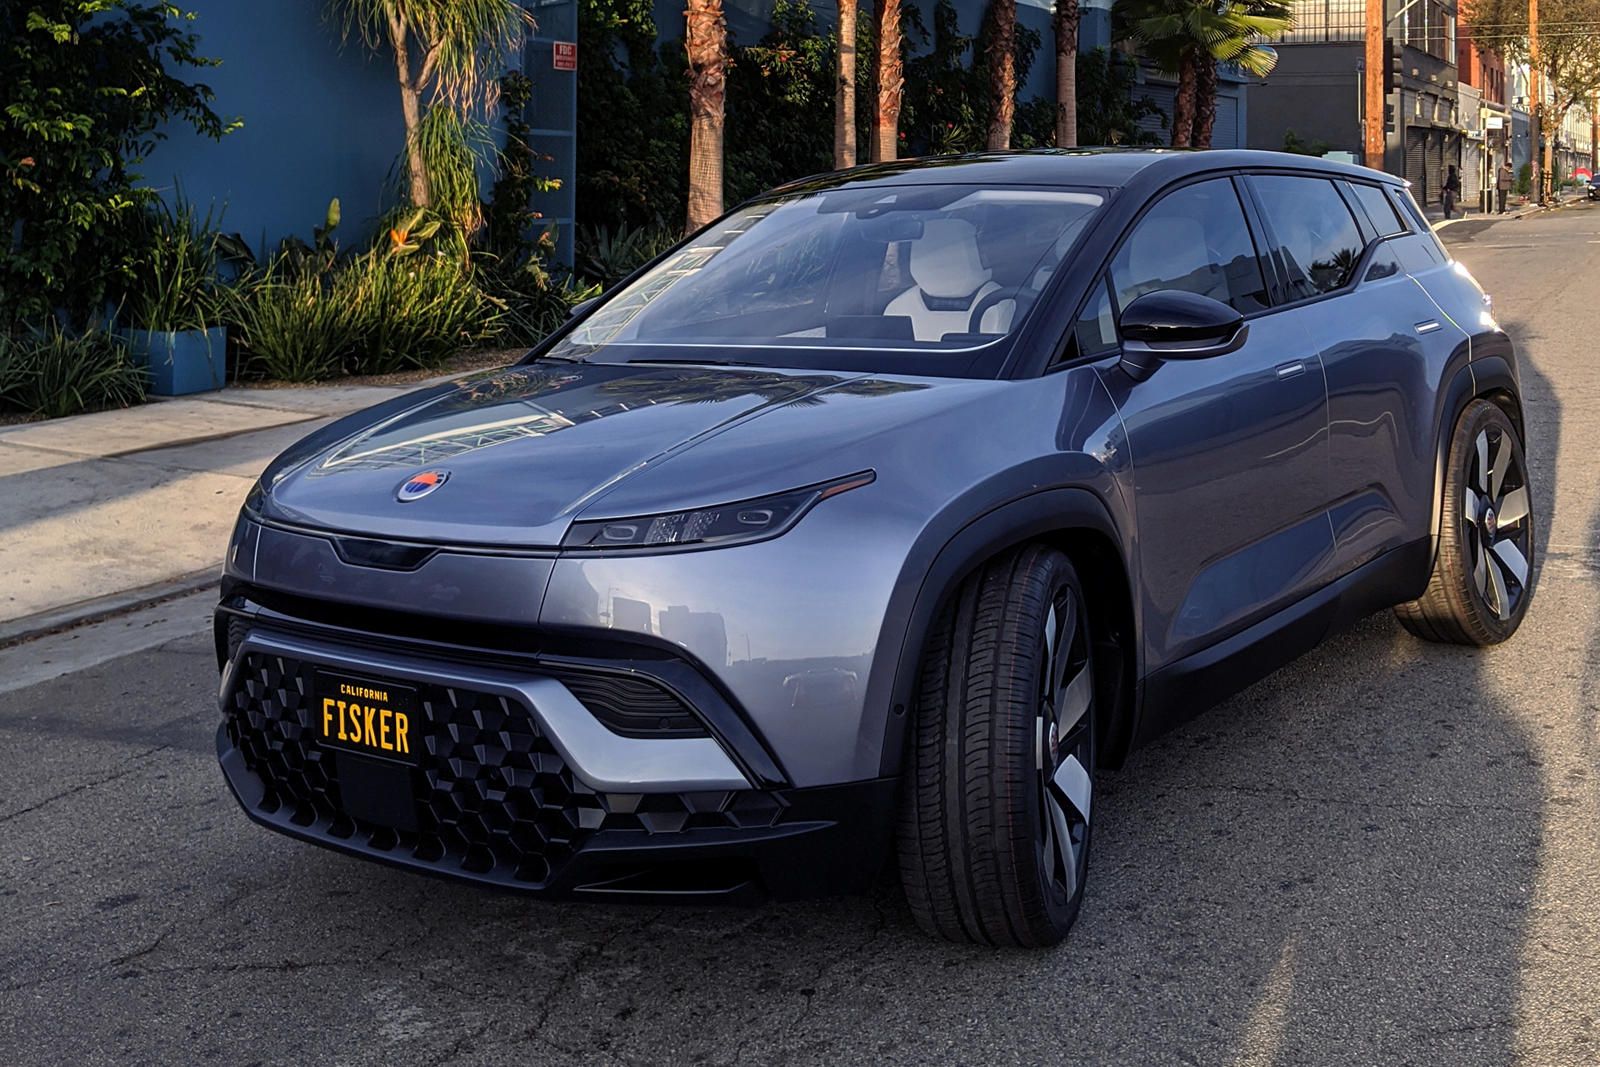 the Ocean Electric SUV has two Battery chemistries